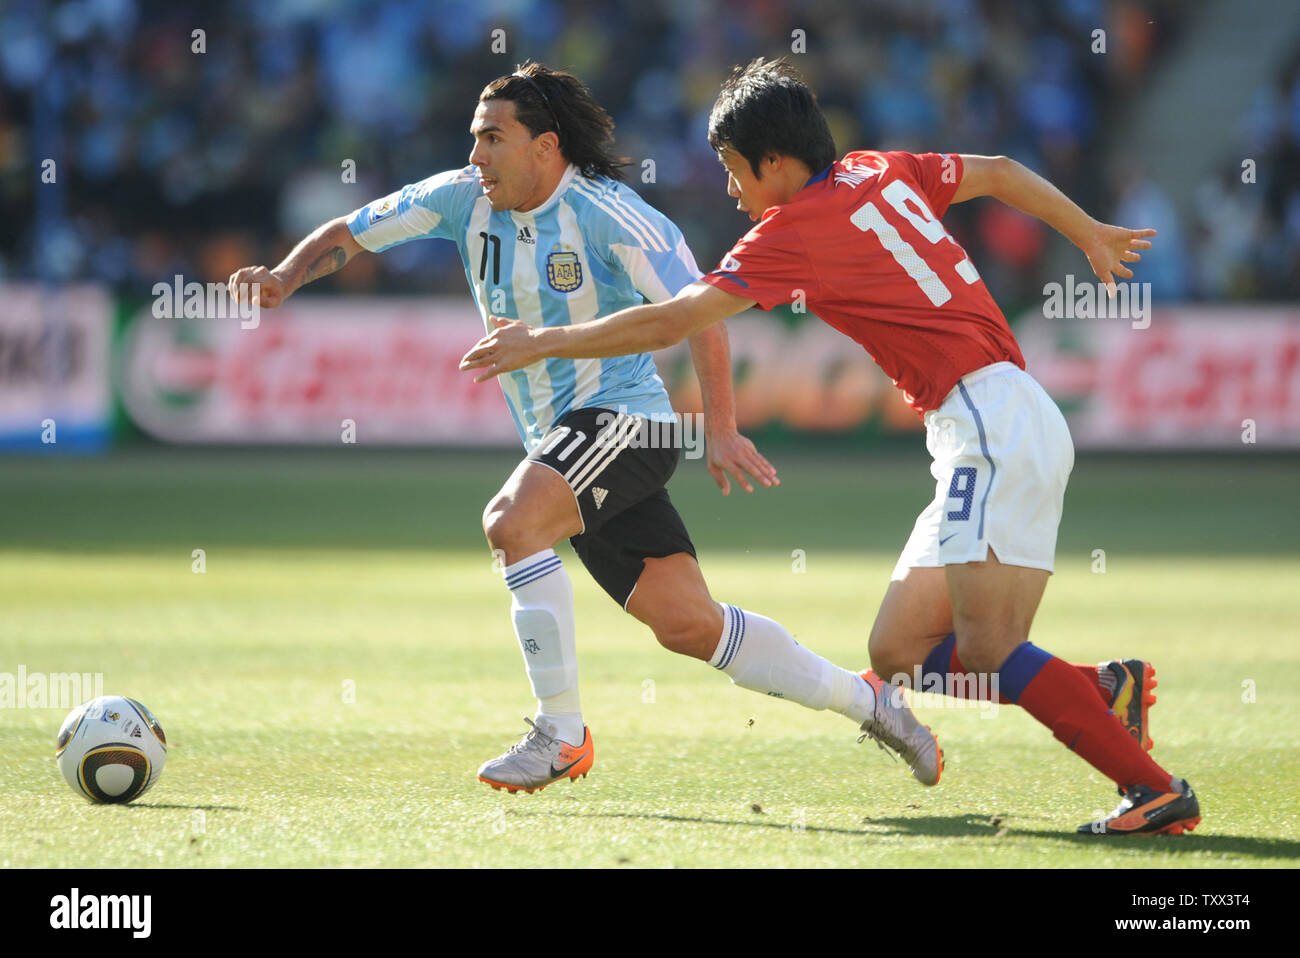 Carlos Tevez of Argentina and Yeom Ki Hun of South Korea during the Group B match at Soccer City Stadium in Johannesburg, South Africa on June 17, 2010. UPI/Chris Brunskill Stock Photo